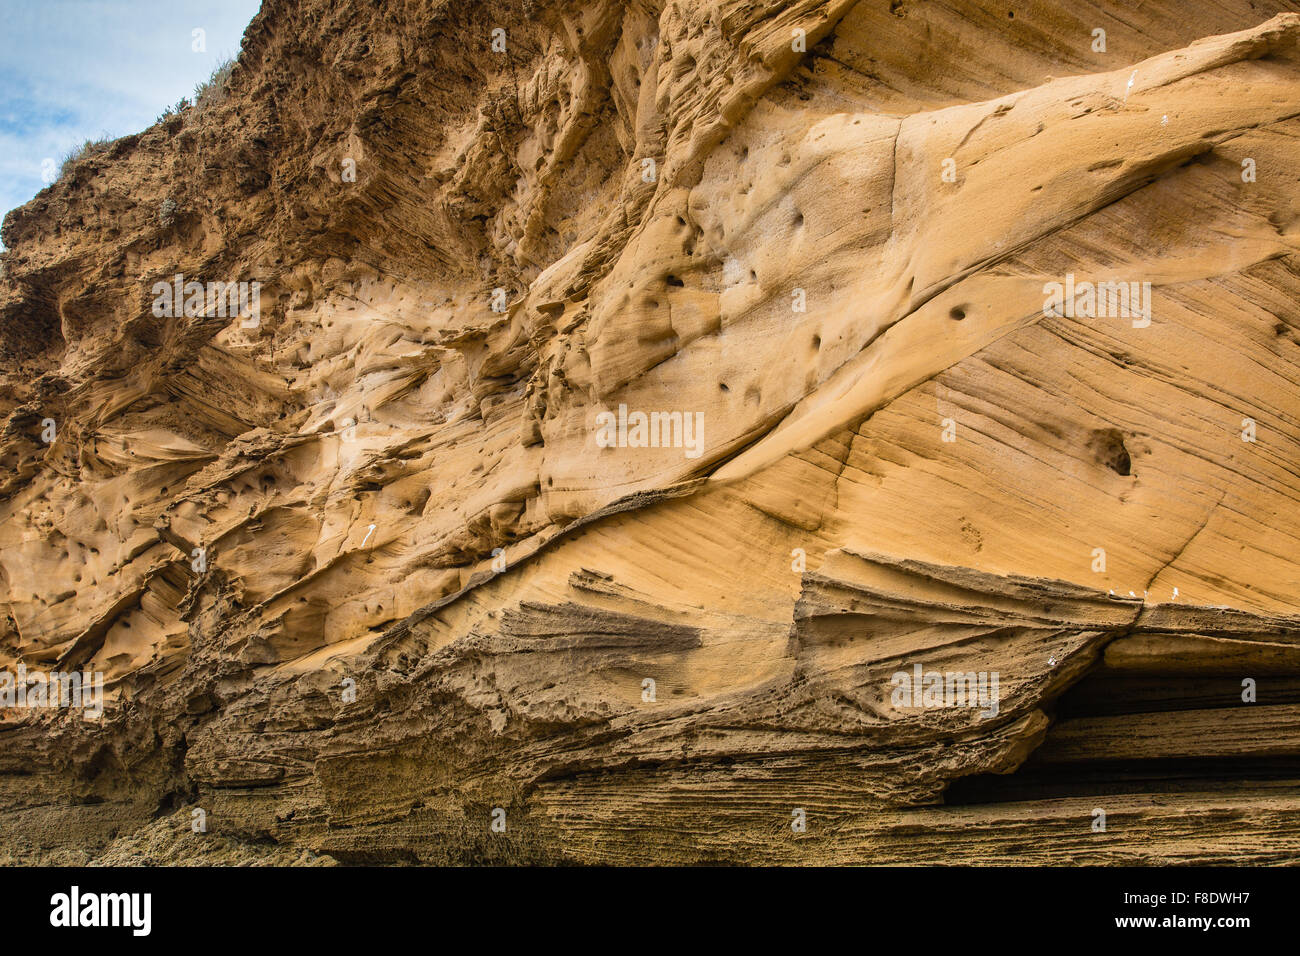 Atlantic coast of Morocco is made up of sand and eroded sandstone rocks. Stock Photo